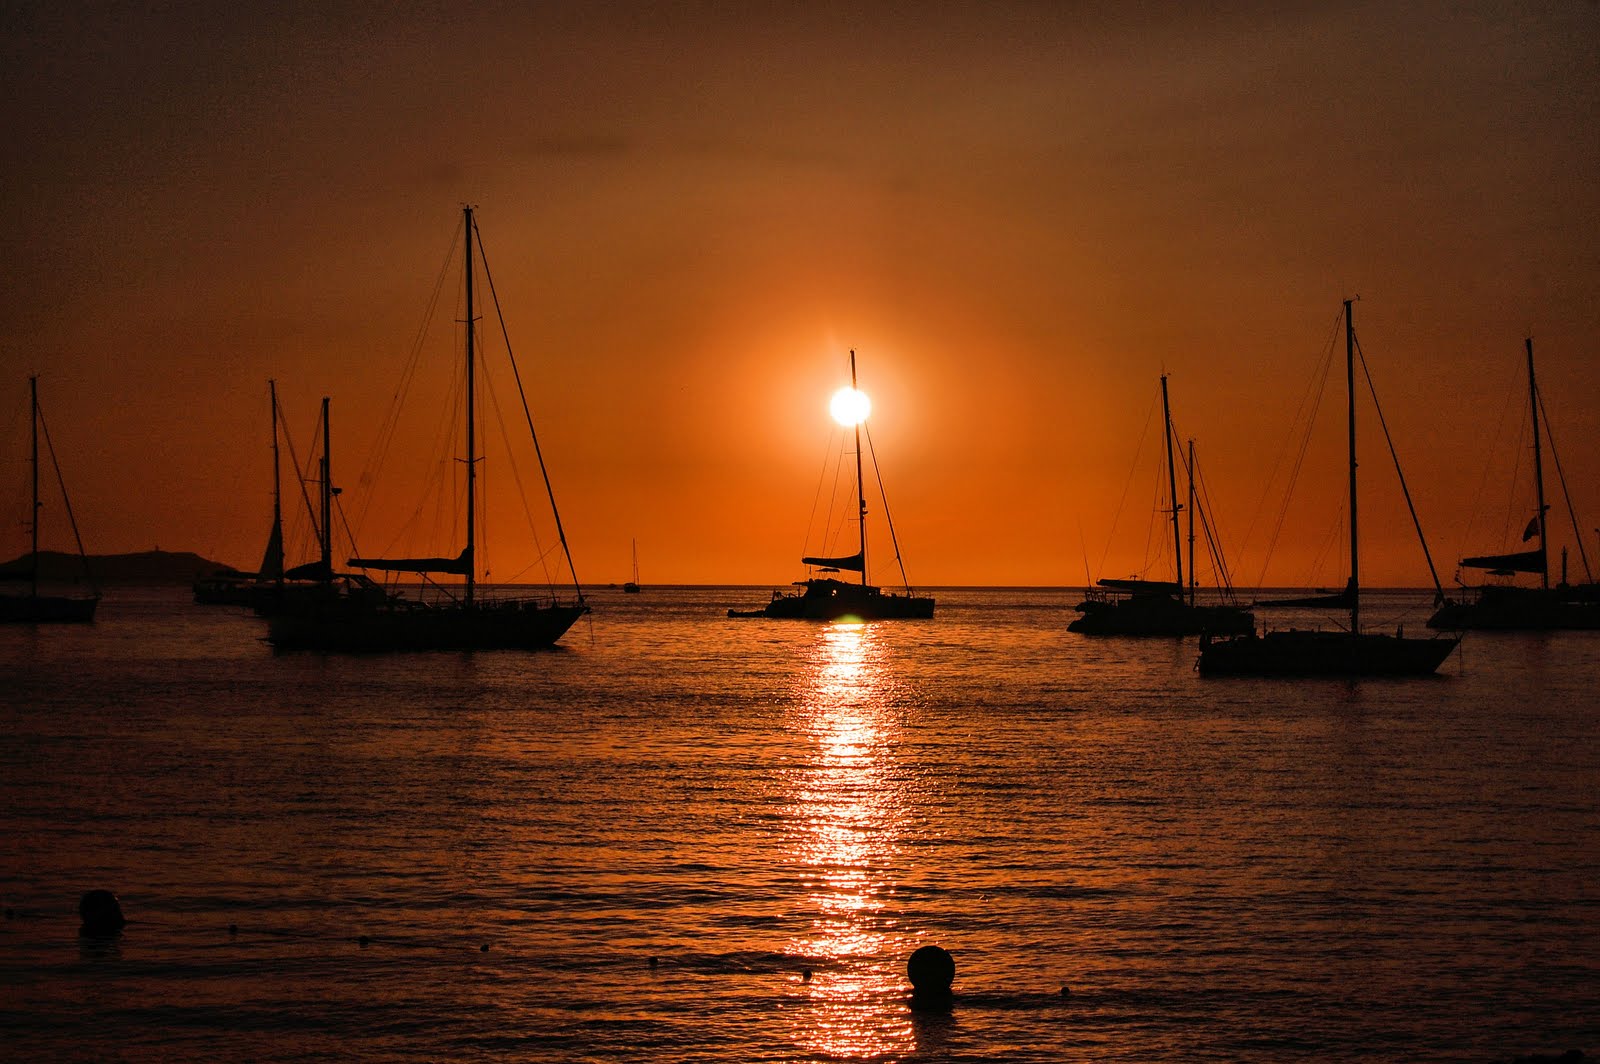 My Travel Photo's: Boats and sunsets